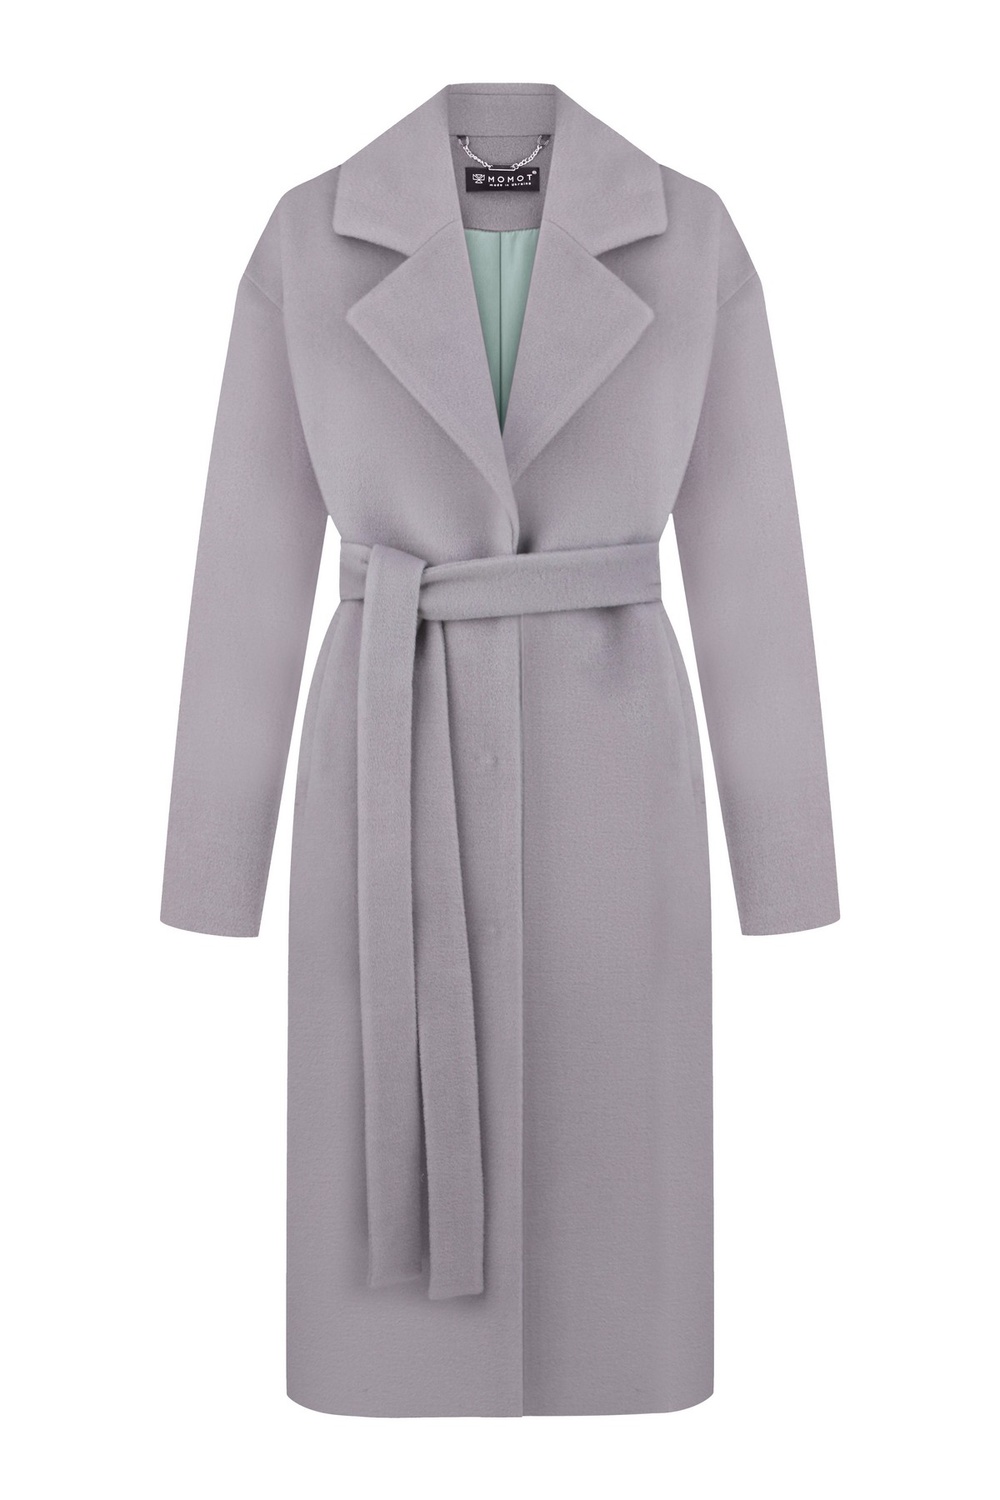 Velvety wool coat with a small pile light lavender color